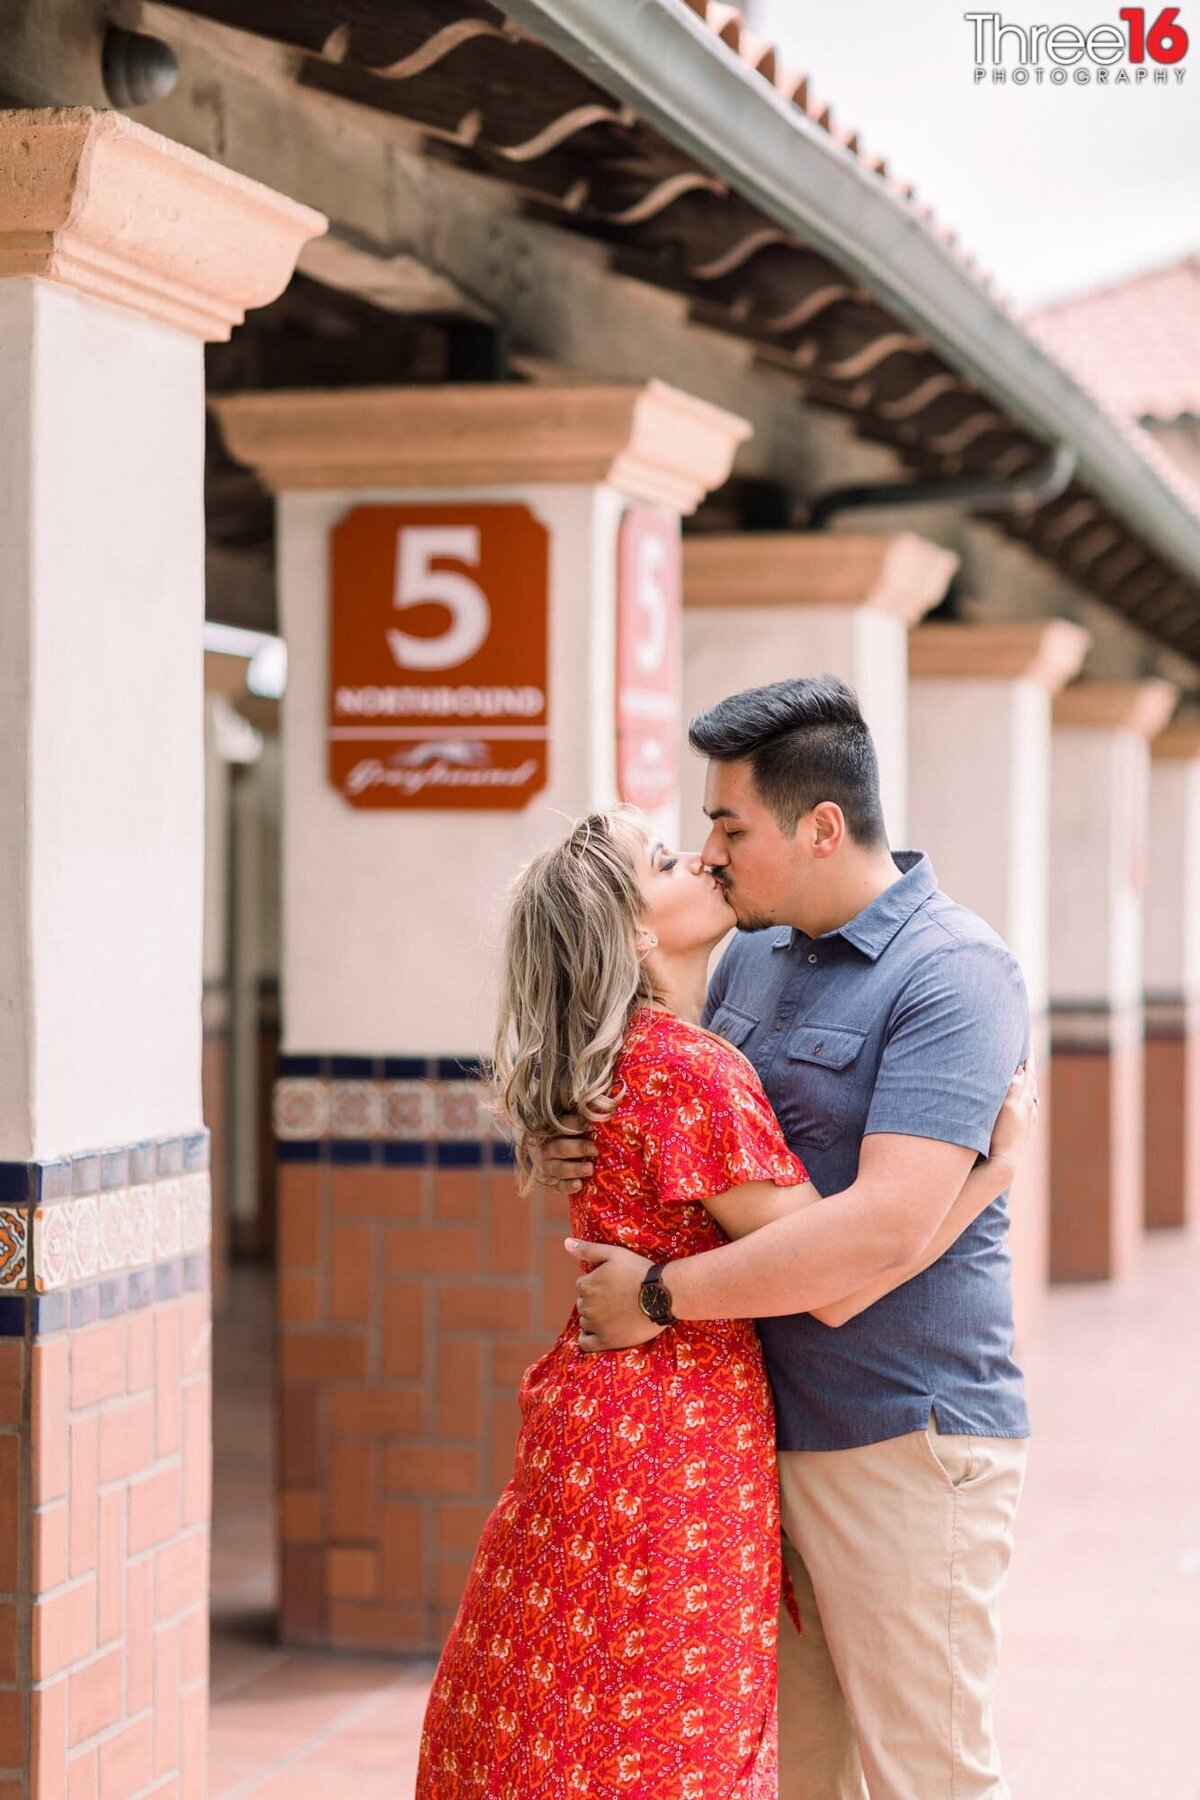 Engaged couple share a kiss on the dock at the Santa Ana Train Station